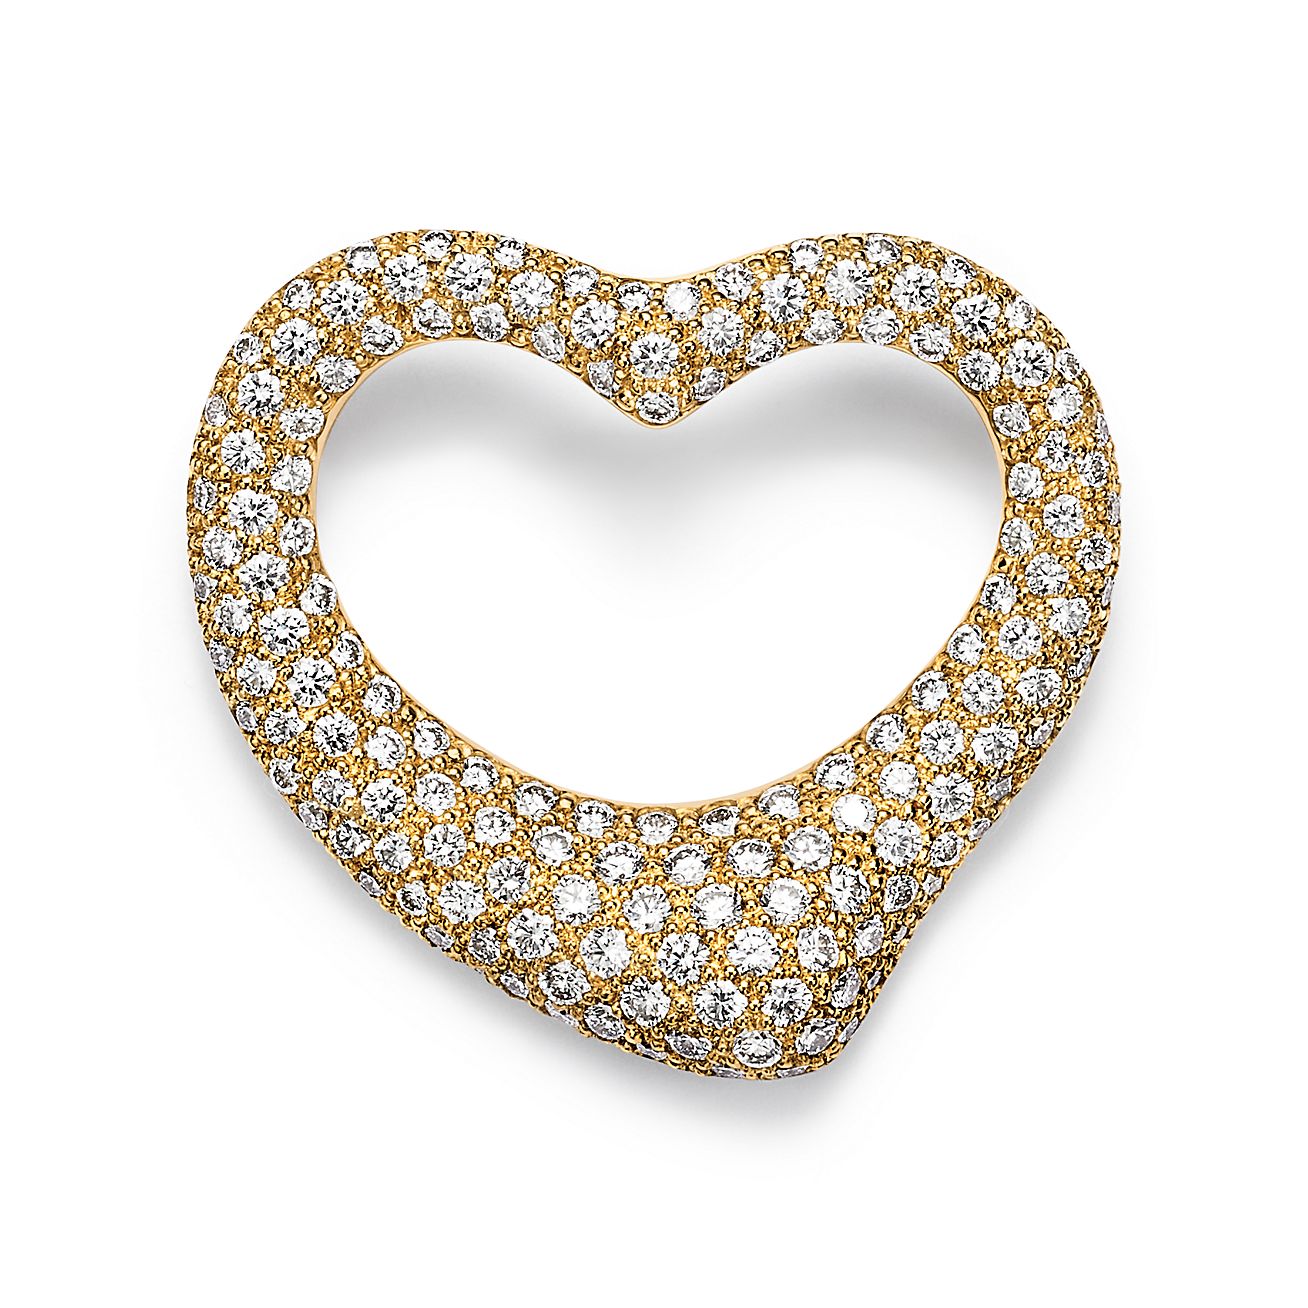 Elsa Peretti® Open Heart Brooch in Yellow Gold with Pavé Diamonds 